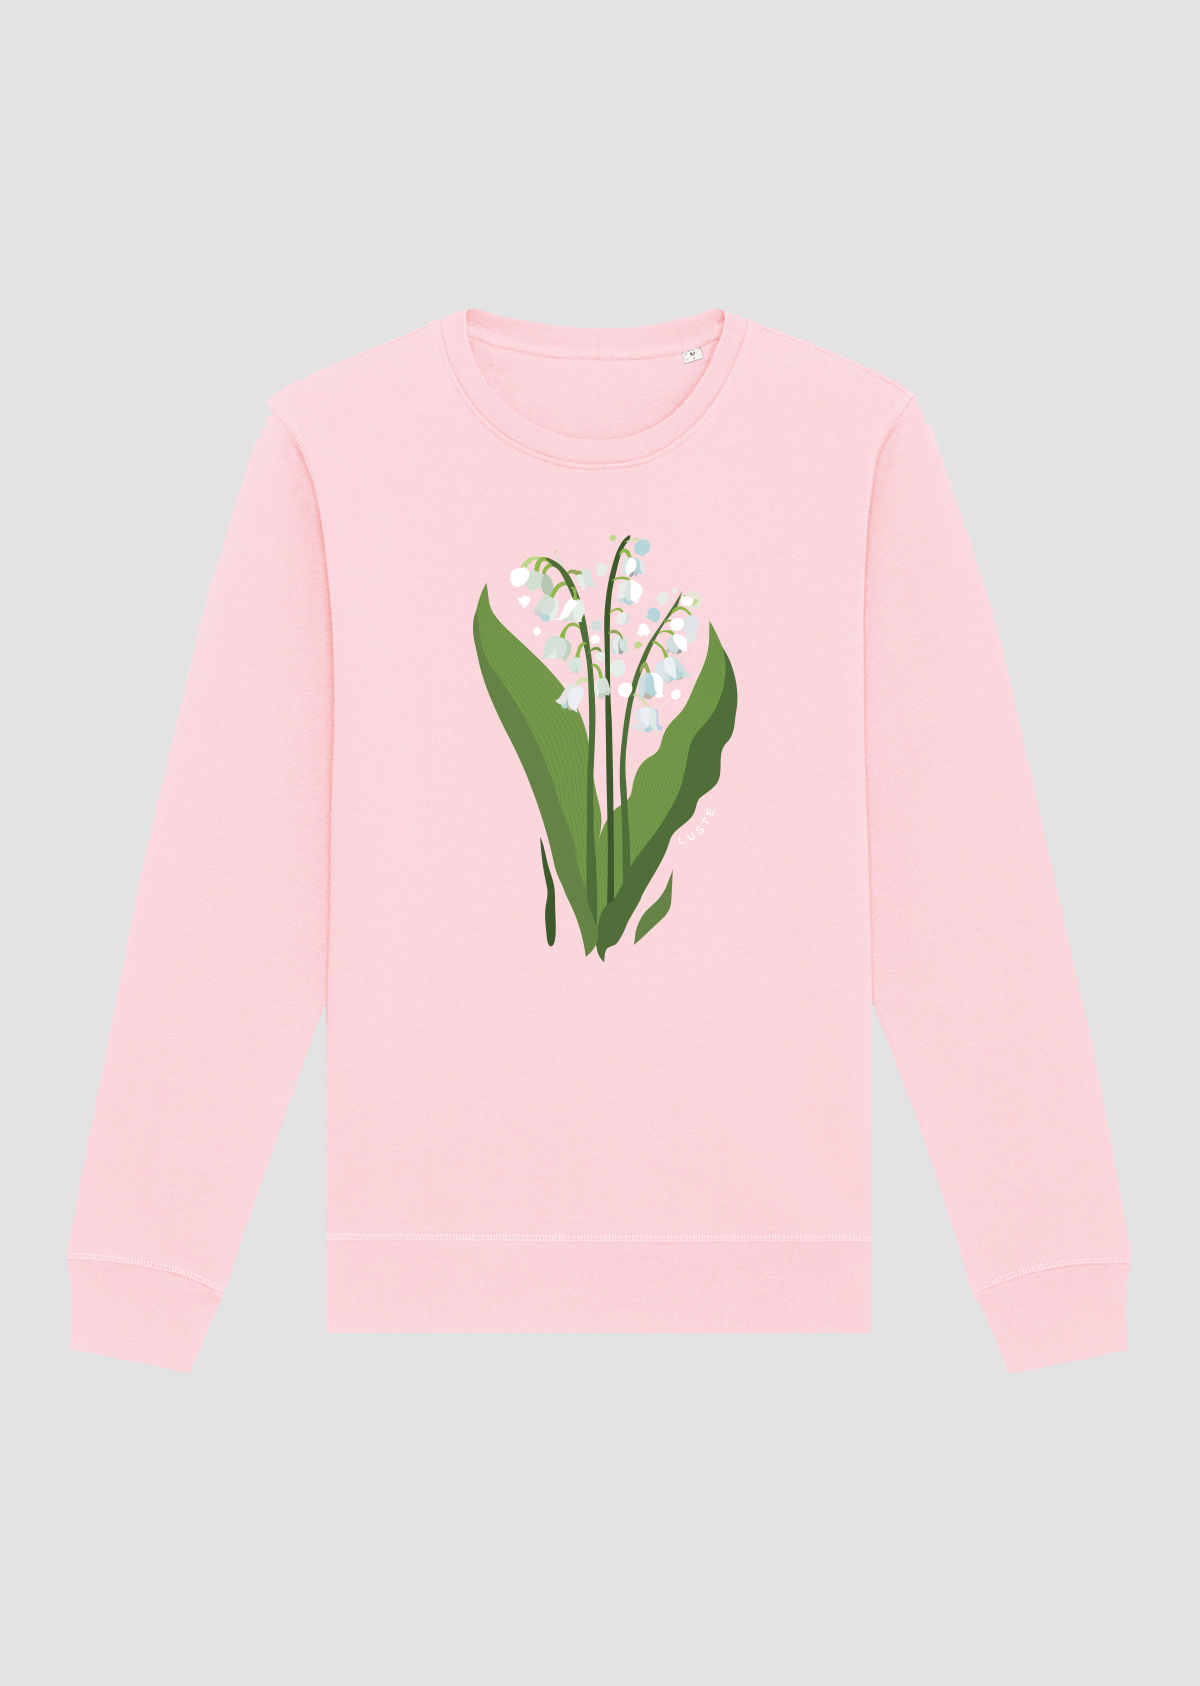 Sweatshirt "Charming Lily of the Valley"